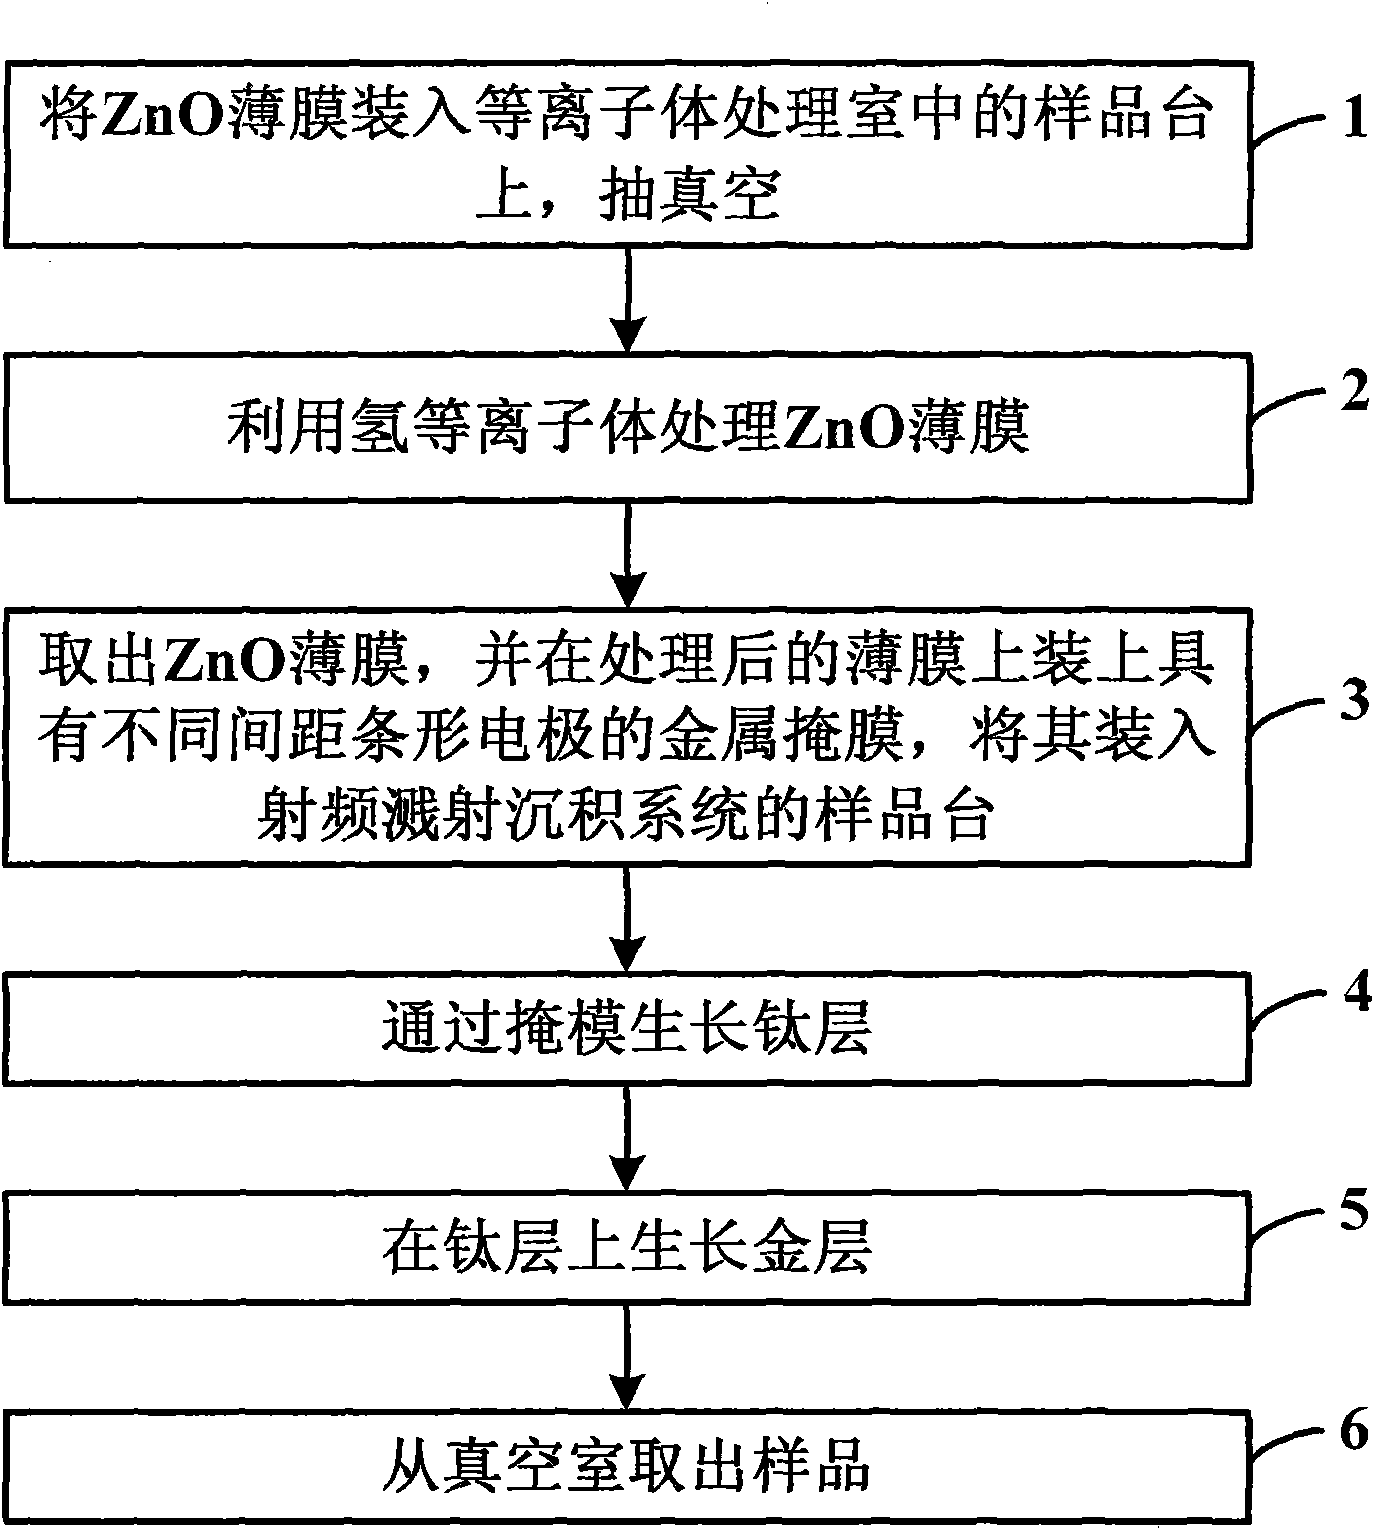 Method for improving ohmic contact of ZnO film